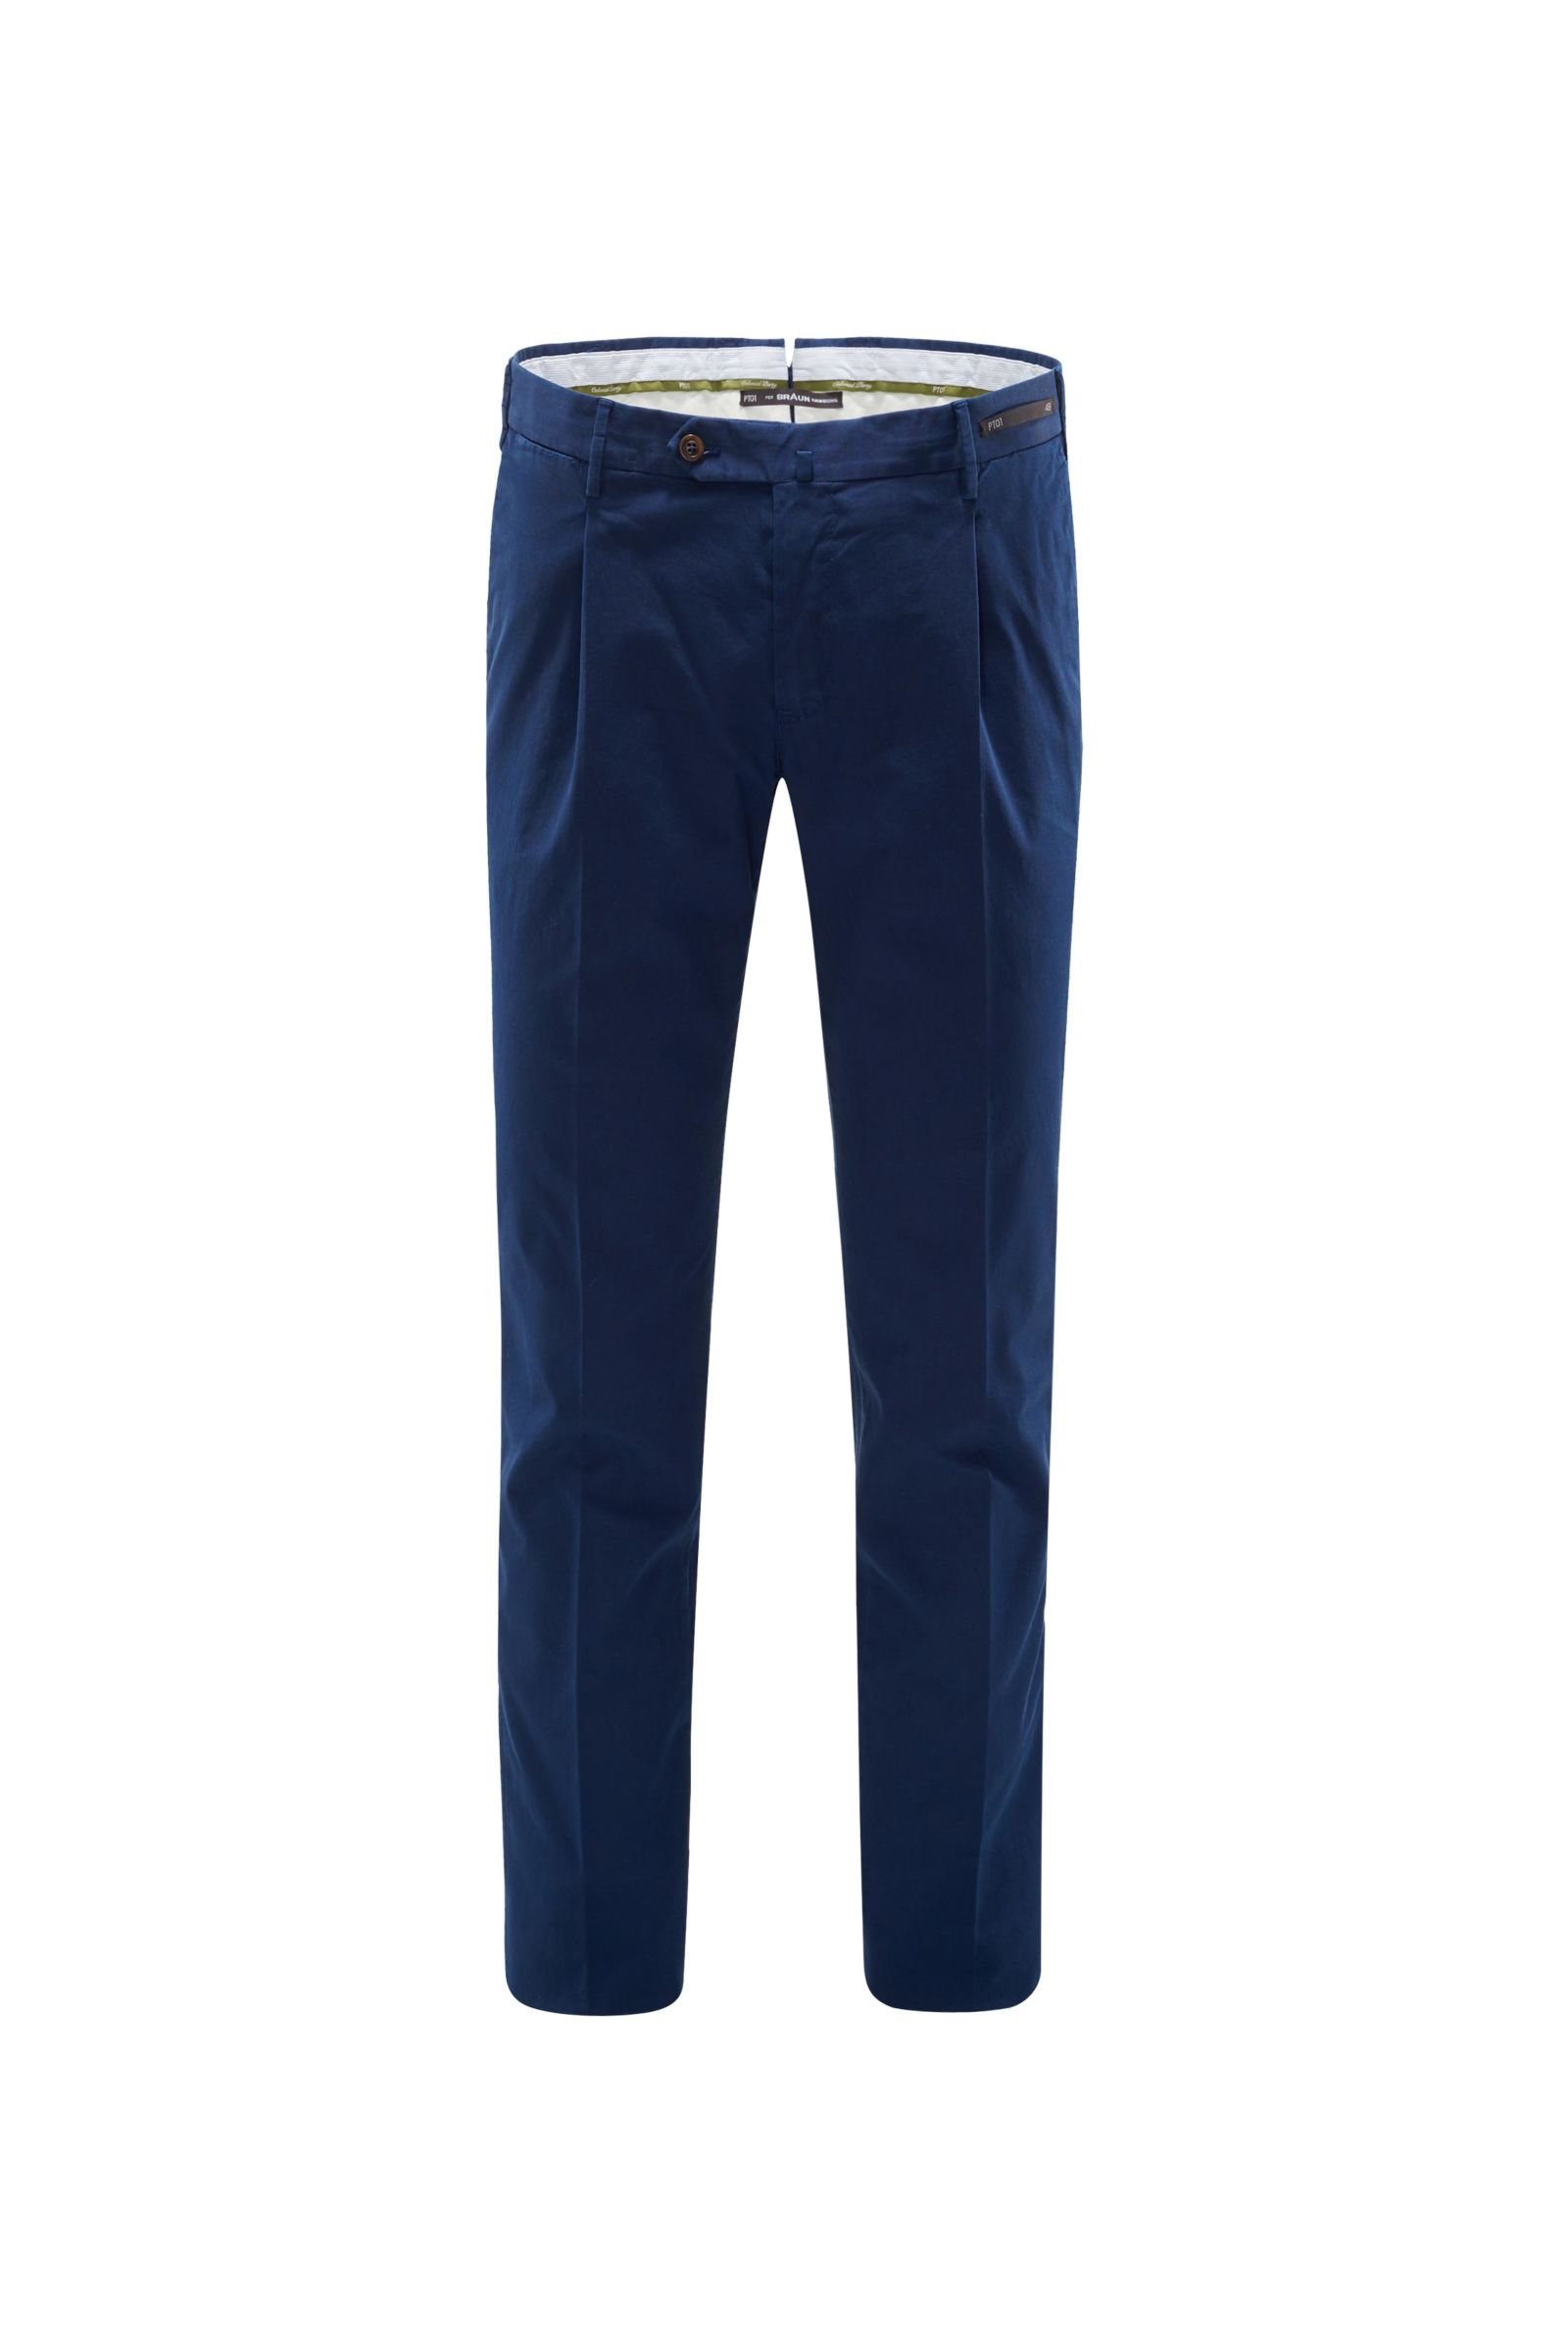 Cotton trousers 'Colonial Party Bombay Hills Super Slim Fit' navy